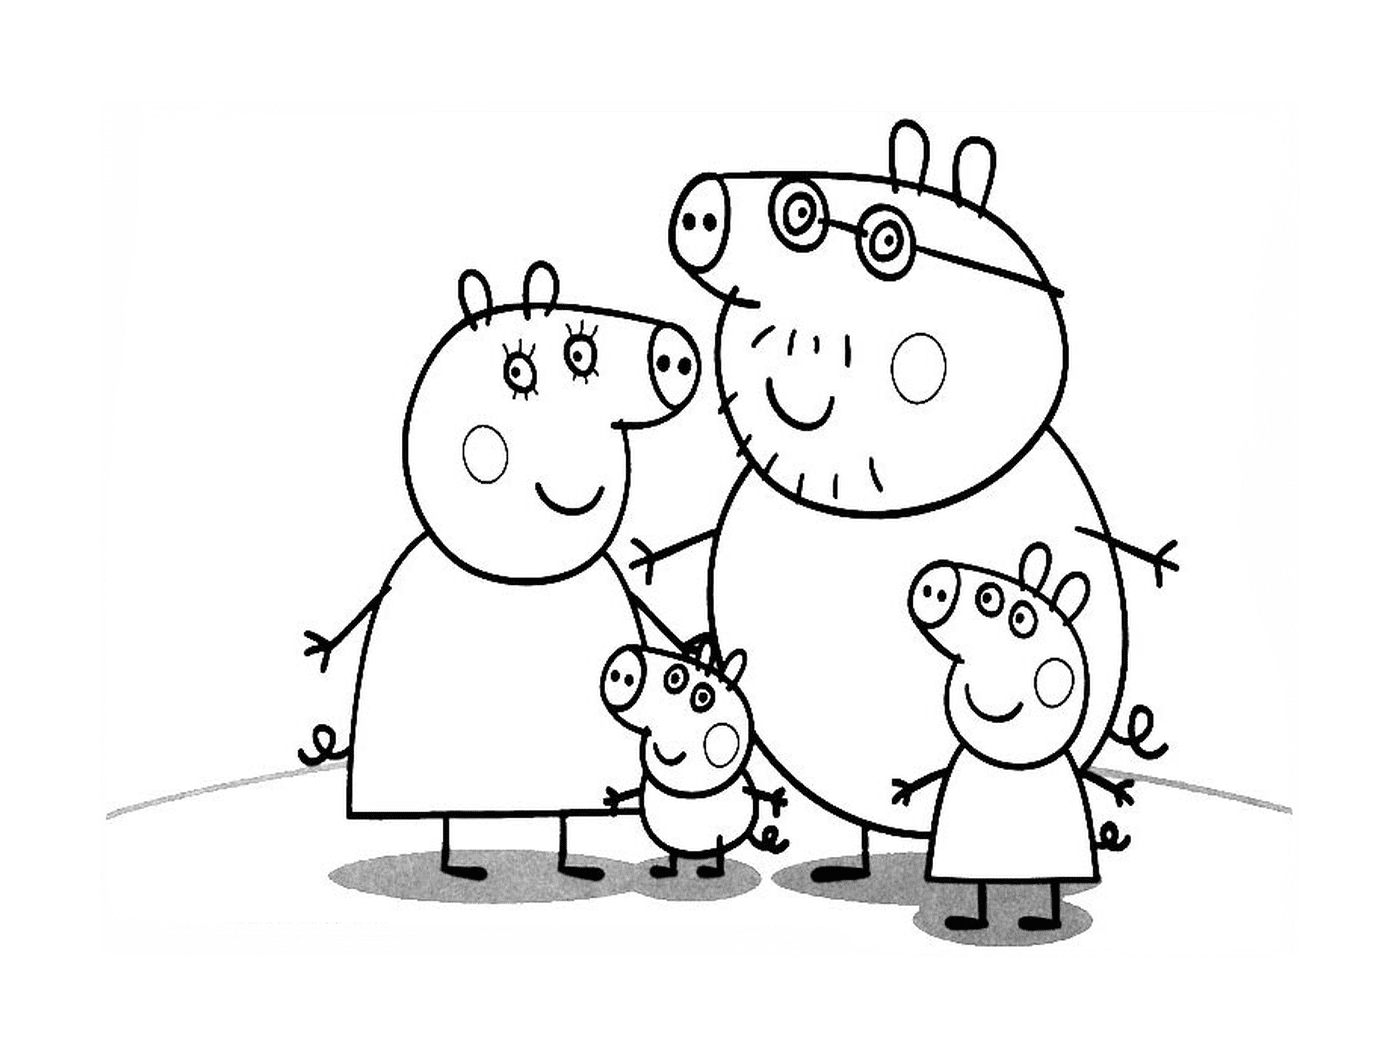  A group of characters Peppa Pig side by side 